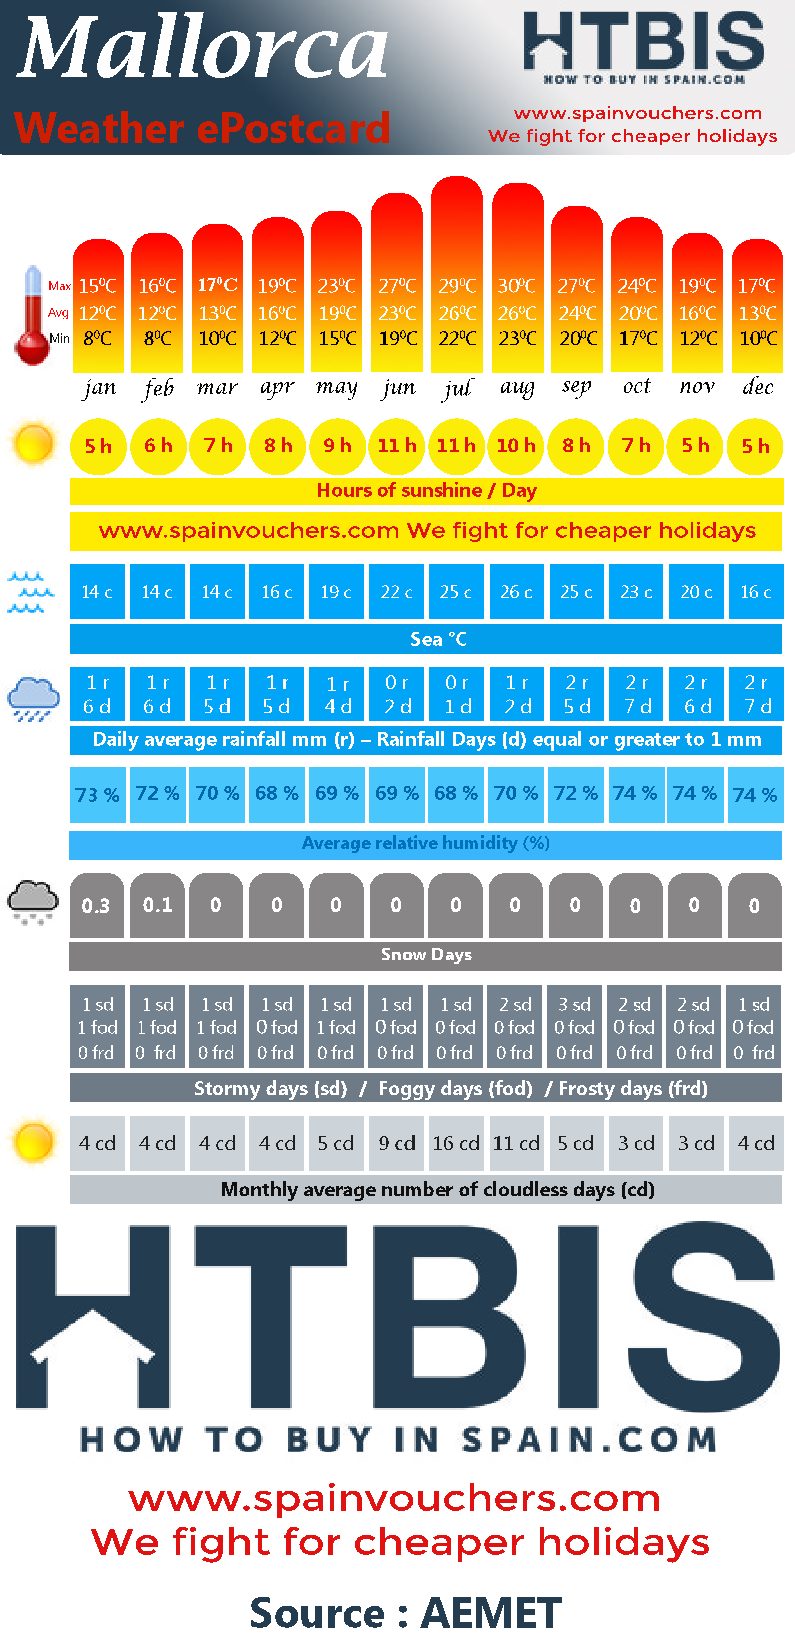 Mallorca, Weather statistic Infographic